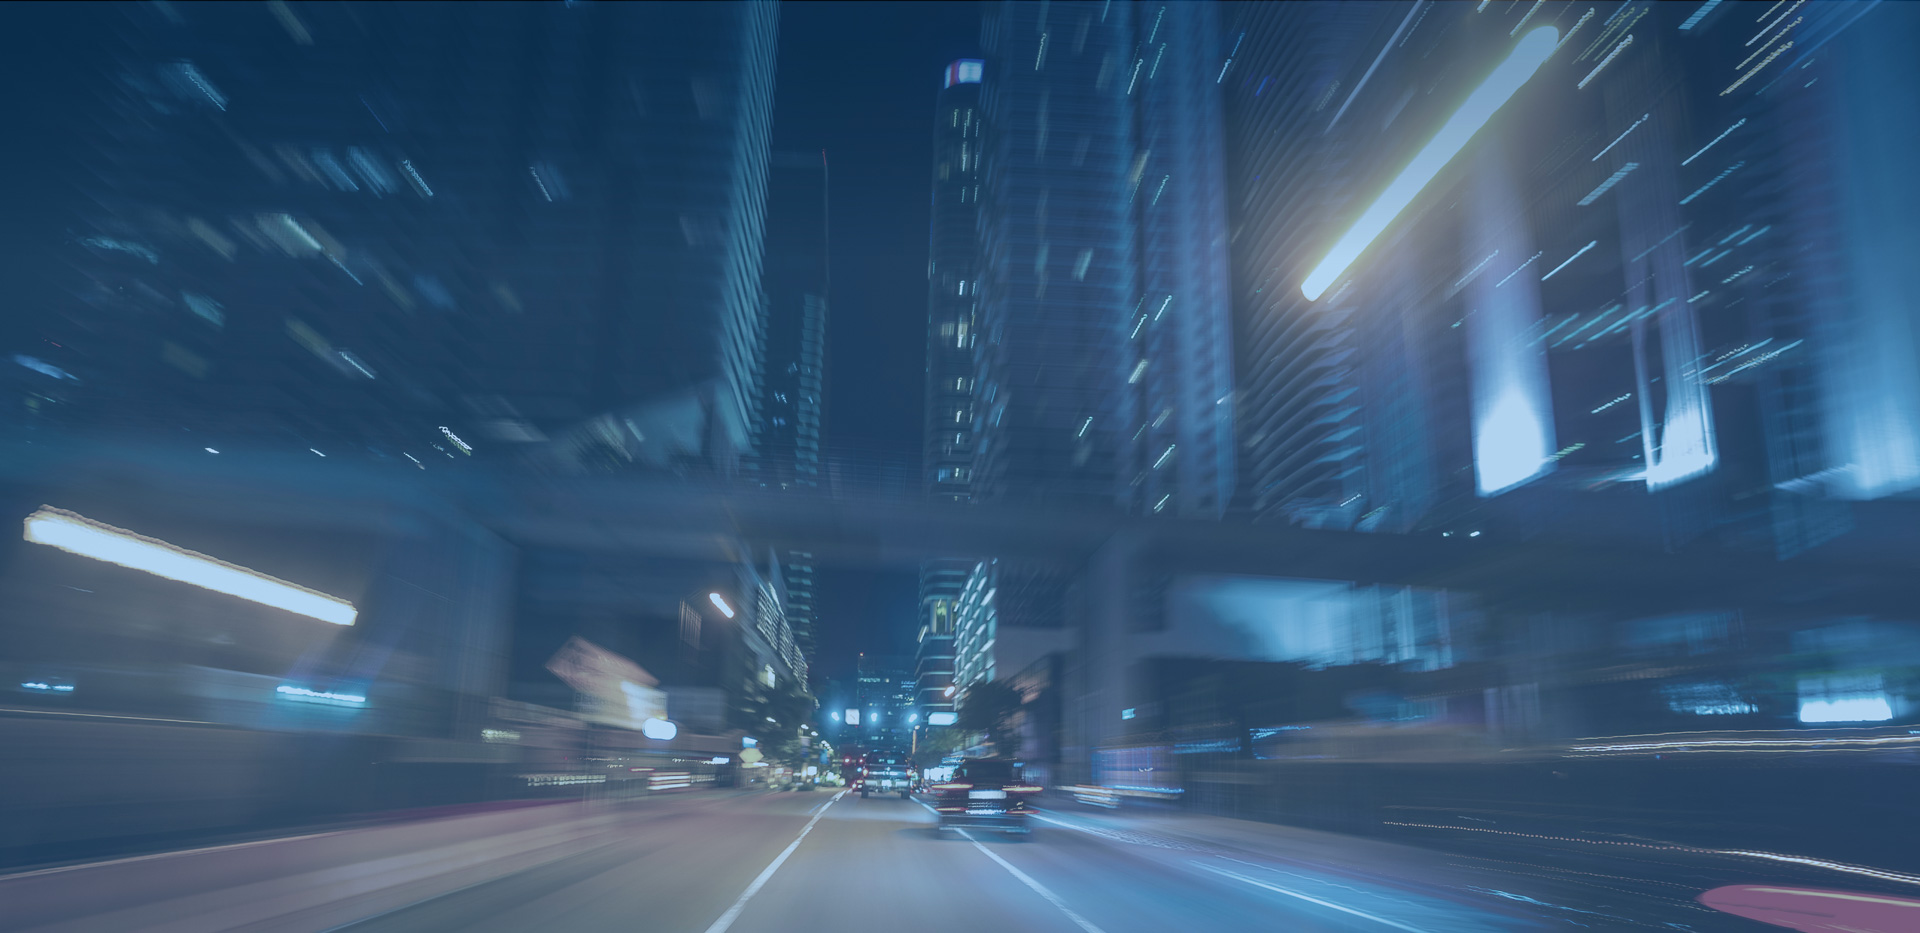 a blurred image of a moving object by night with large buildings, in the style of 32k uhd, speed and motion, dark gray and aquamarine, streamlined design, street scene